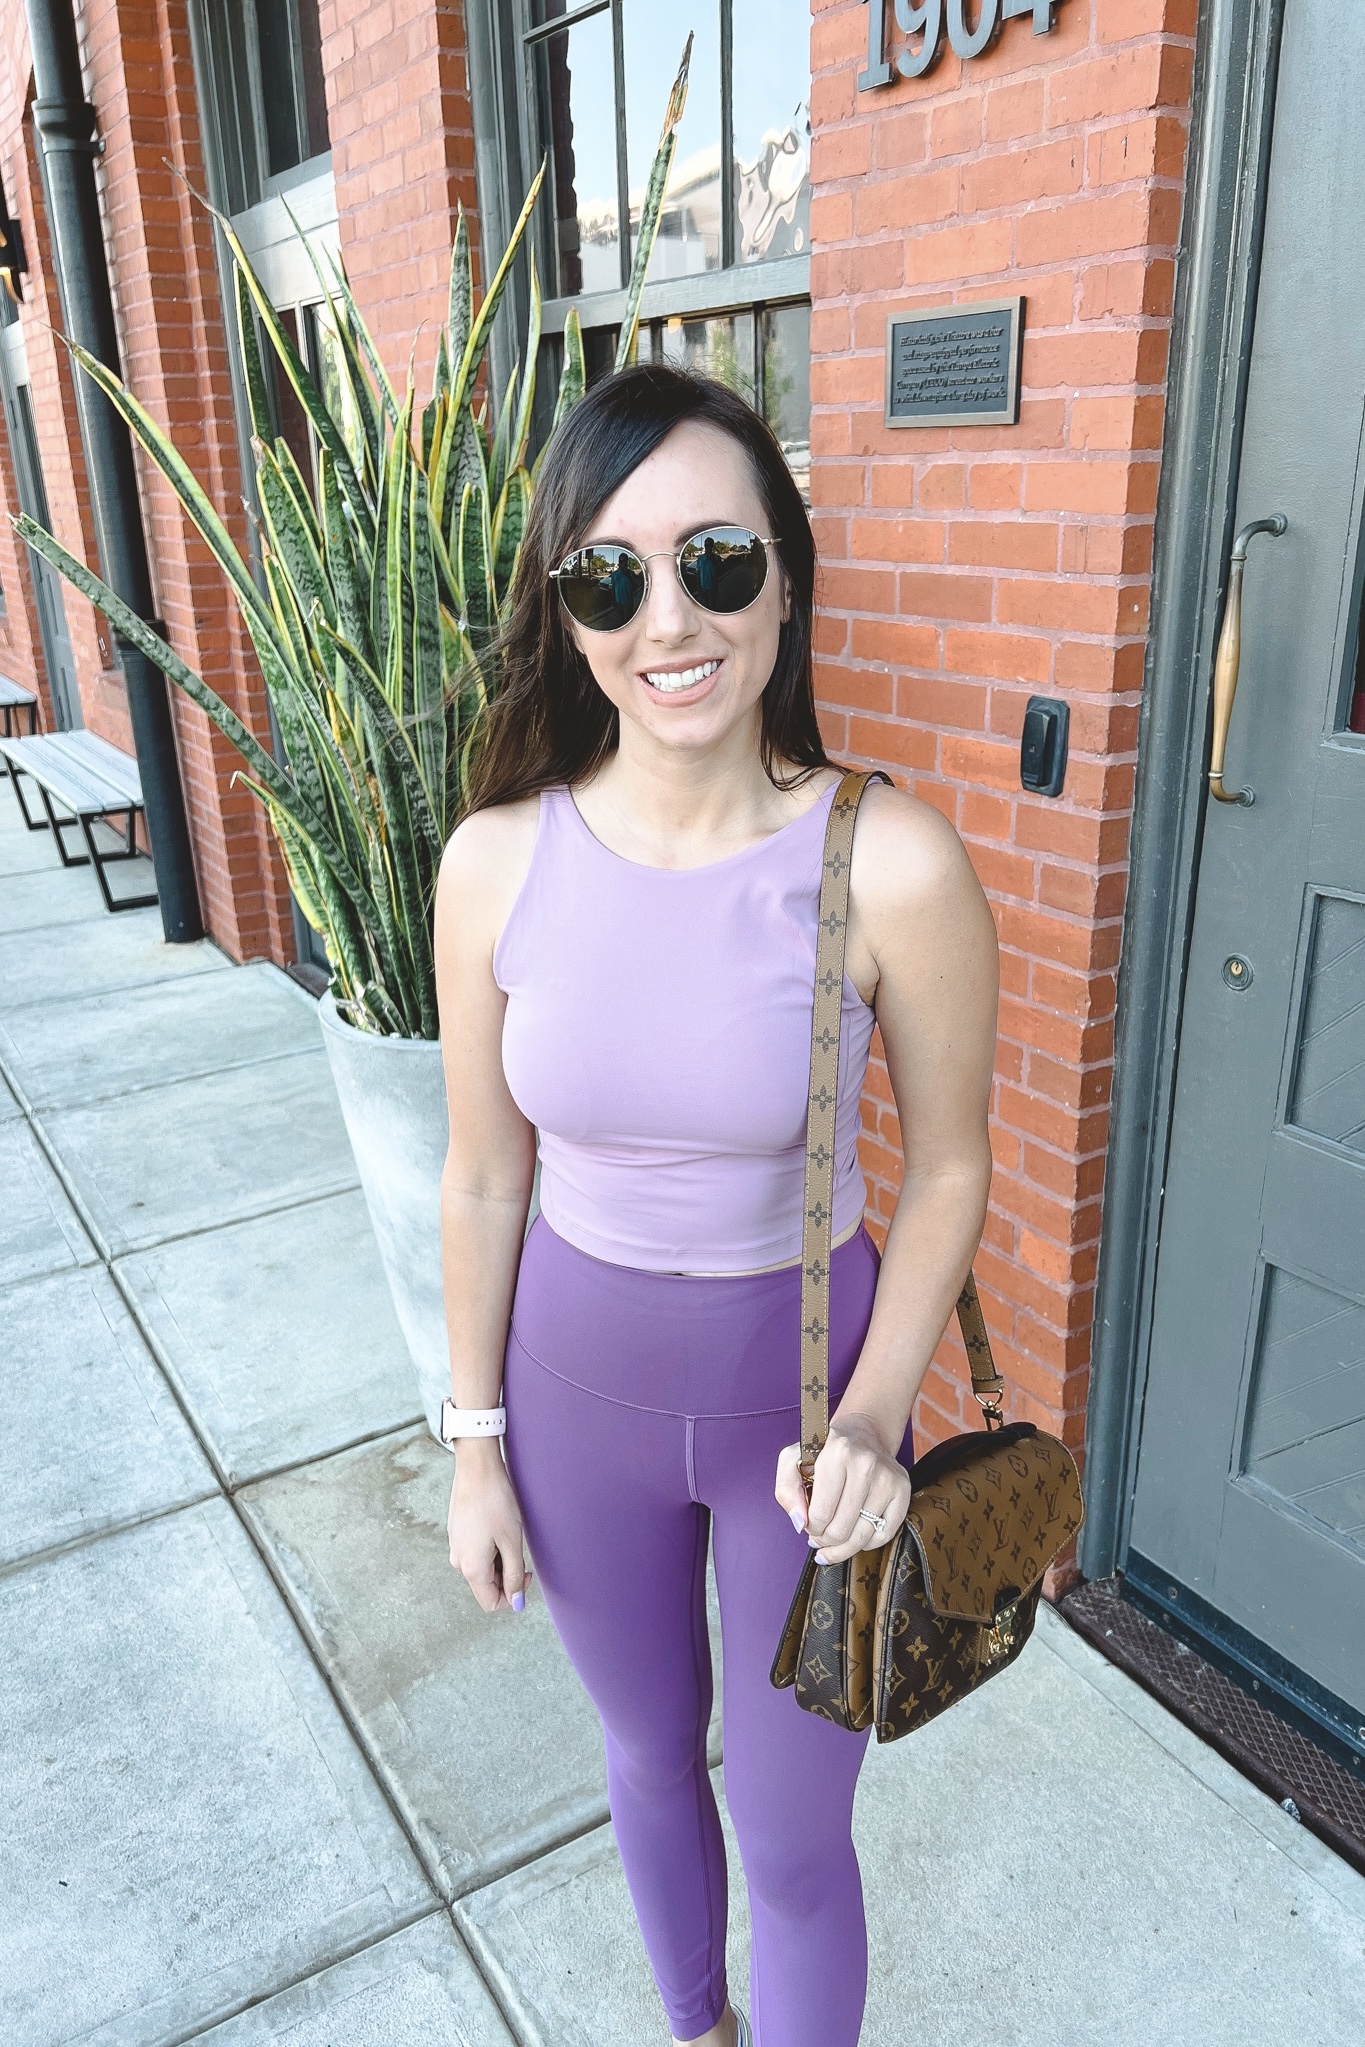 A Full lululemon Align Tank Review + Our Top 5 alternatives - The Yoga  Nomads